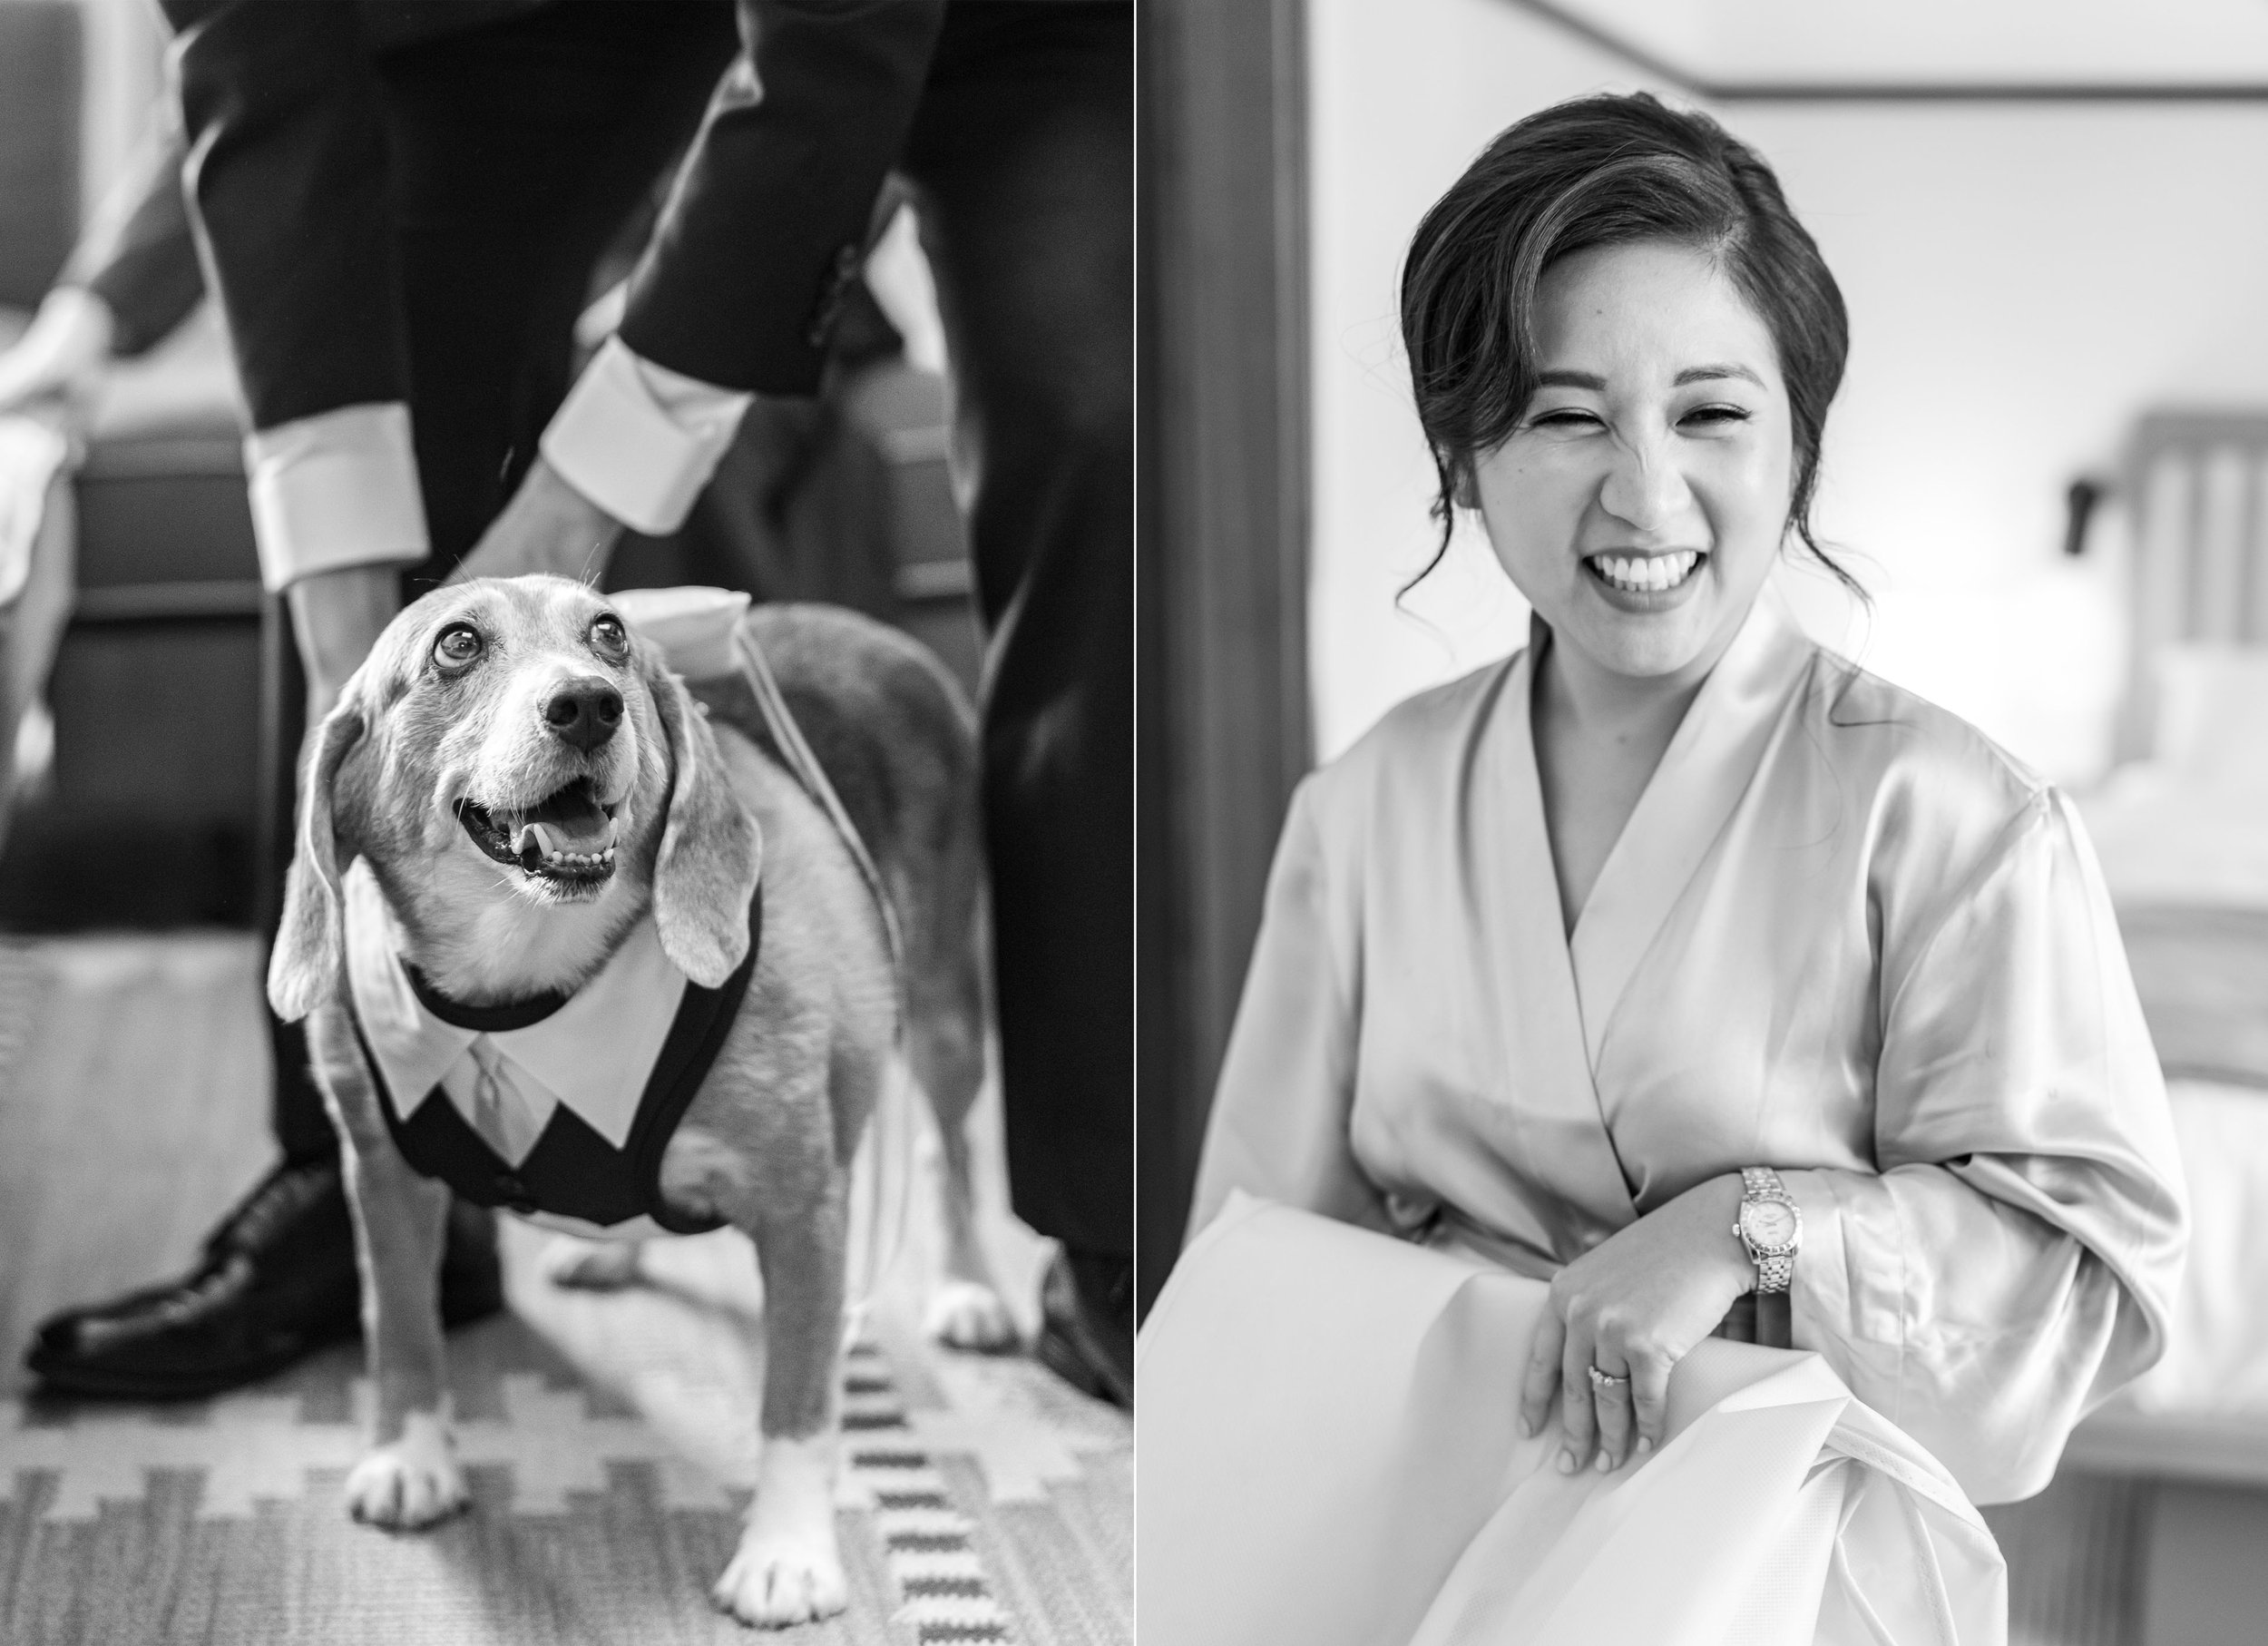 Andy the beagle dog and the bride getting ready for wedding at Eaton hotel DC